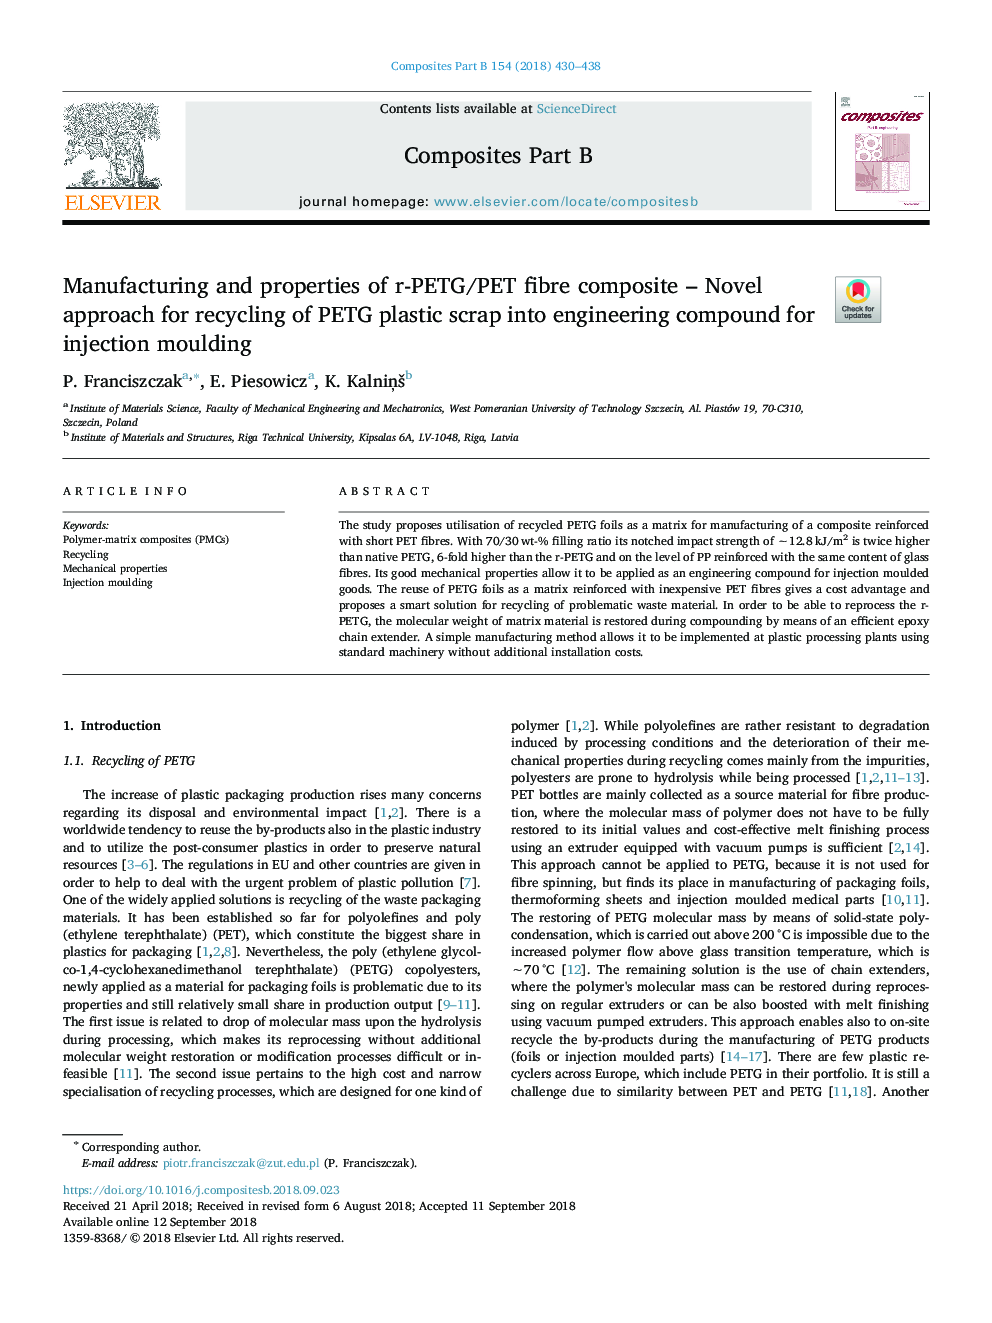 Manufacturing and properties of r-PETG/PET fibre composite - Novel approach for recycling of PETG plastic scrap into engineering compound for injection moulding